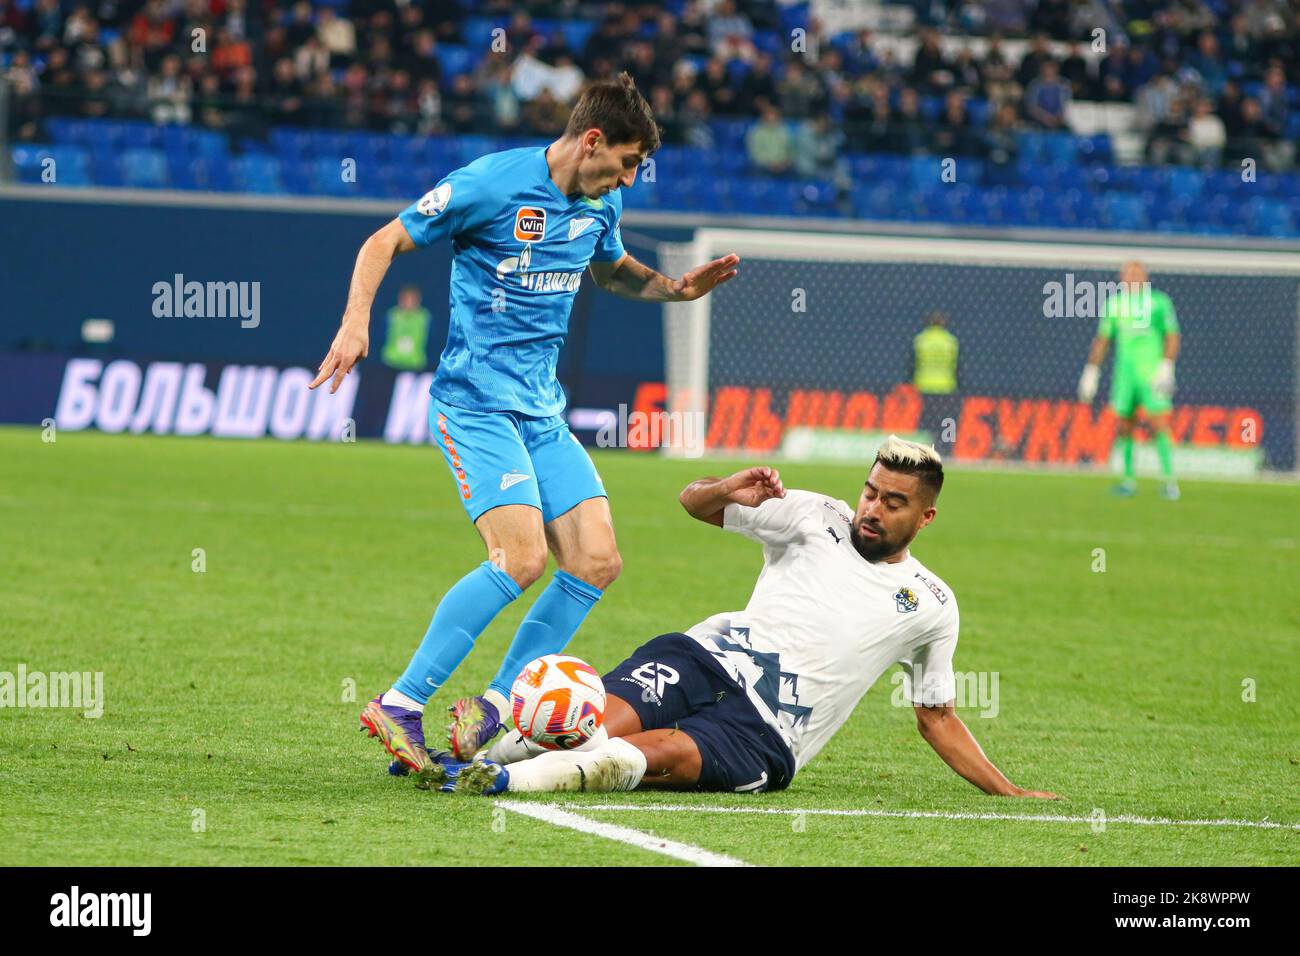 Saint Petersburg, Russia. 24th Oct, 2022. Zelimkhan Bakaev (L) of Zenit and Christian Noboa (R) of Sochi seen in action during the Russian Premier League football match between Zenit Saint Petersburg and Sochi at Gazprom Arena. Final score; Zenit 7:0 Sochi. (Photo by Maksim Konstantinov/SOPA Images/Sipa USA) Credit: Sipa USA/Alamy Live News Stock Photo